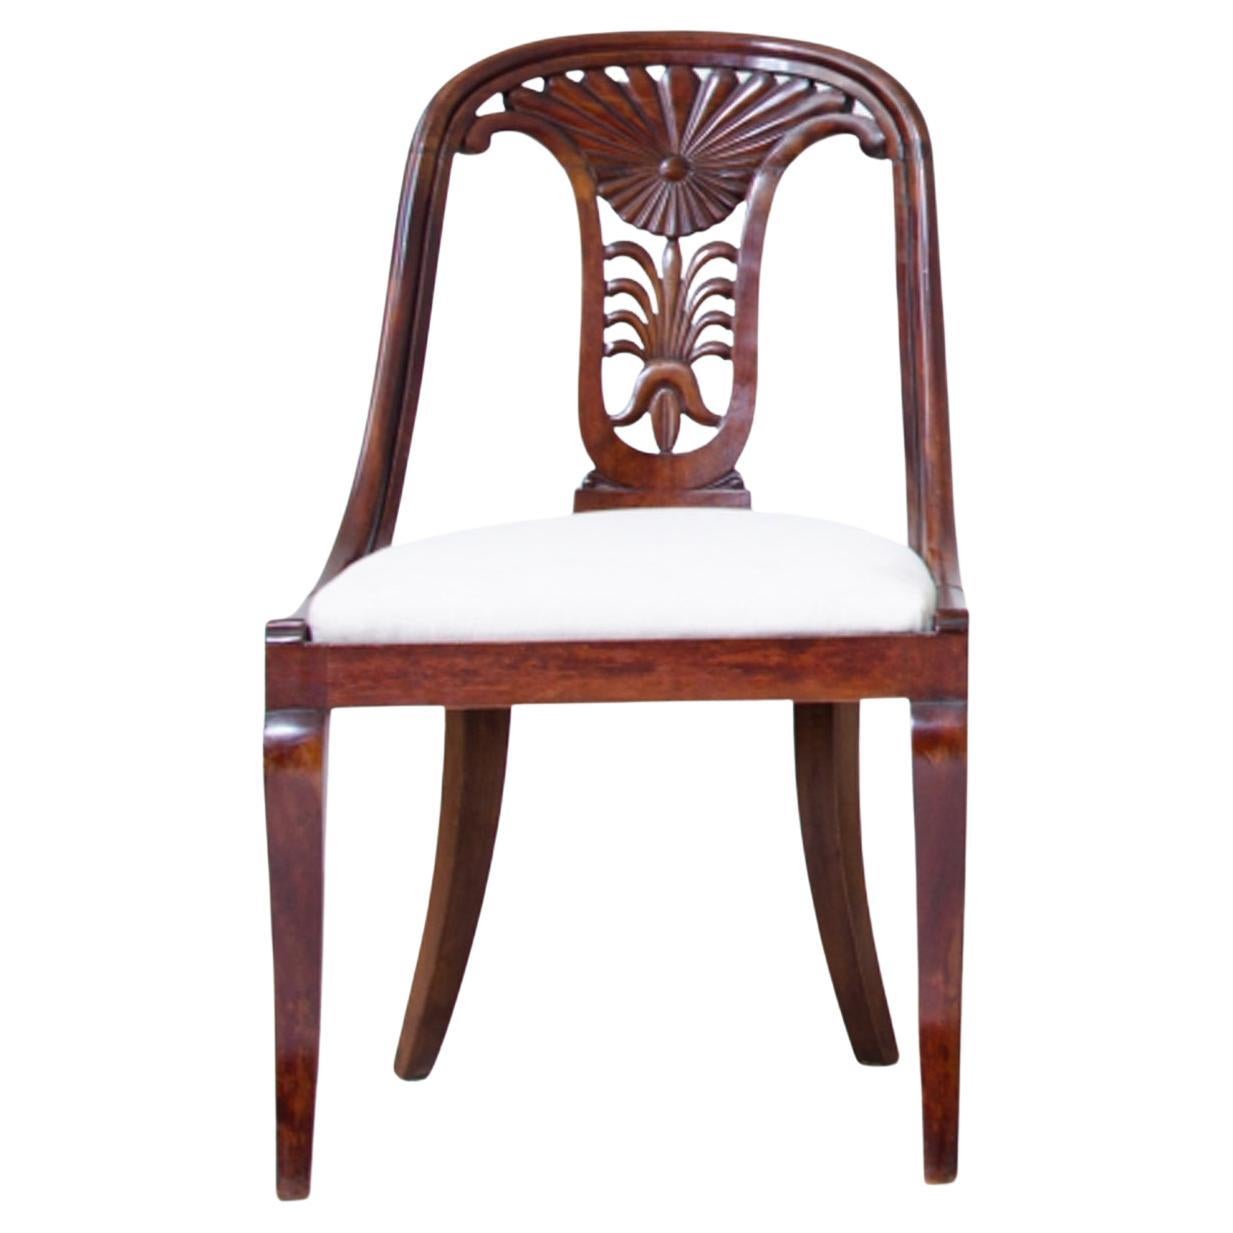 Set of 12 Antique Walnut Cockpit Chairs, Charles X Period